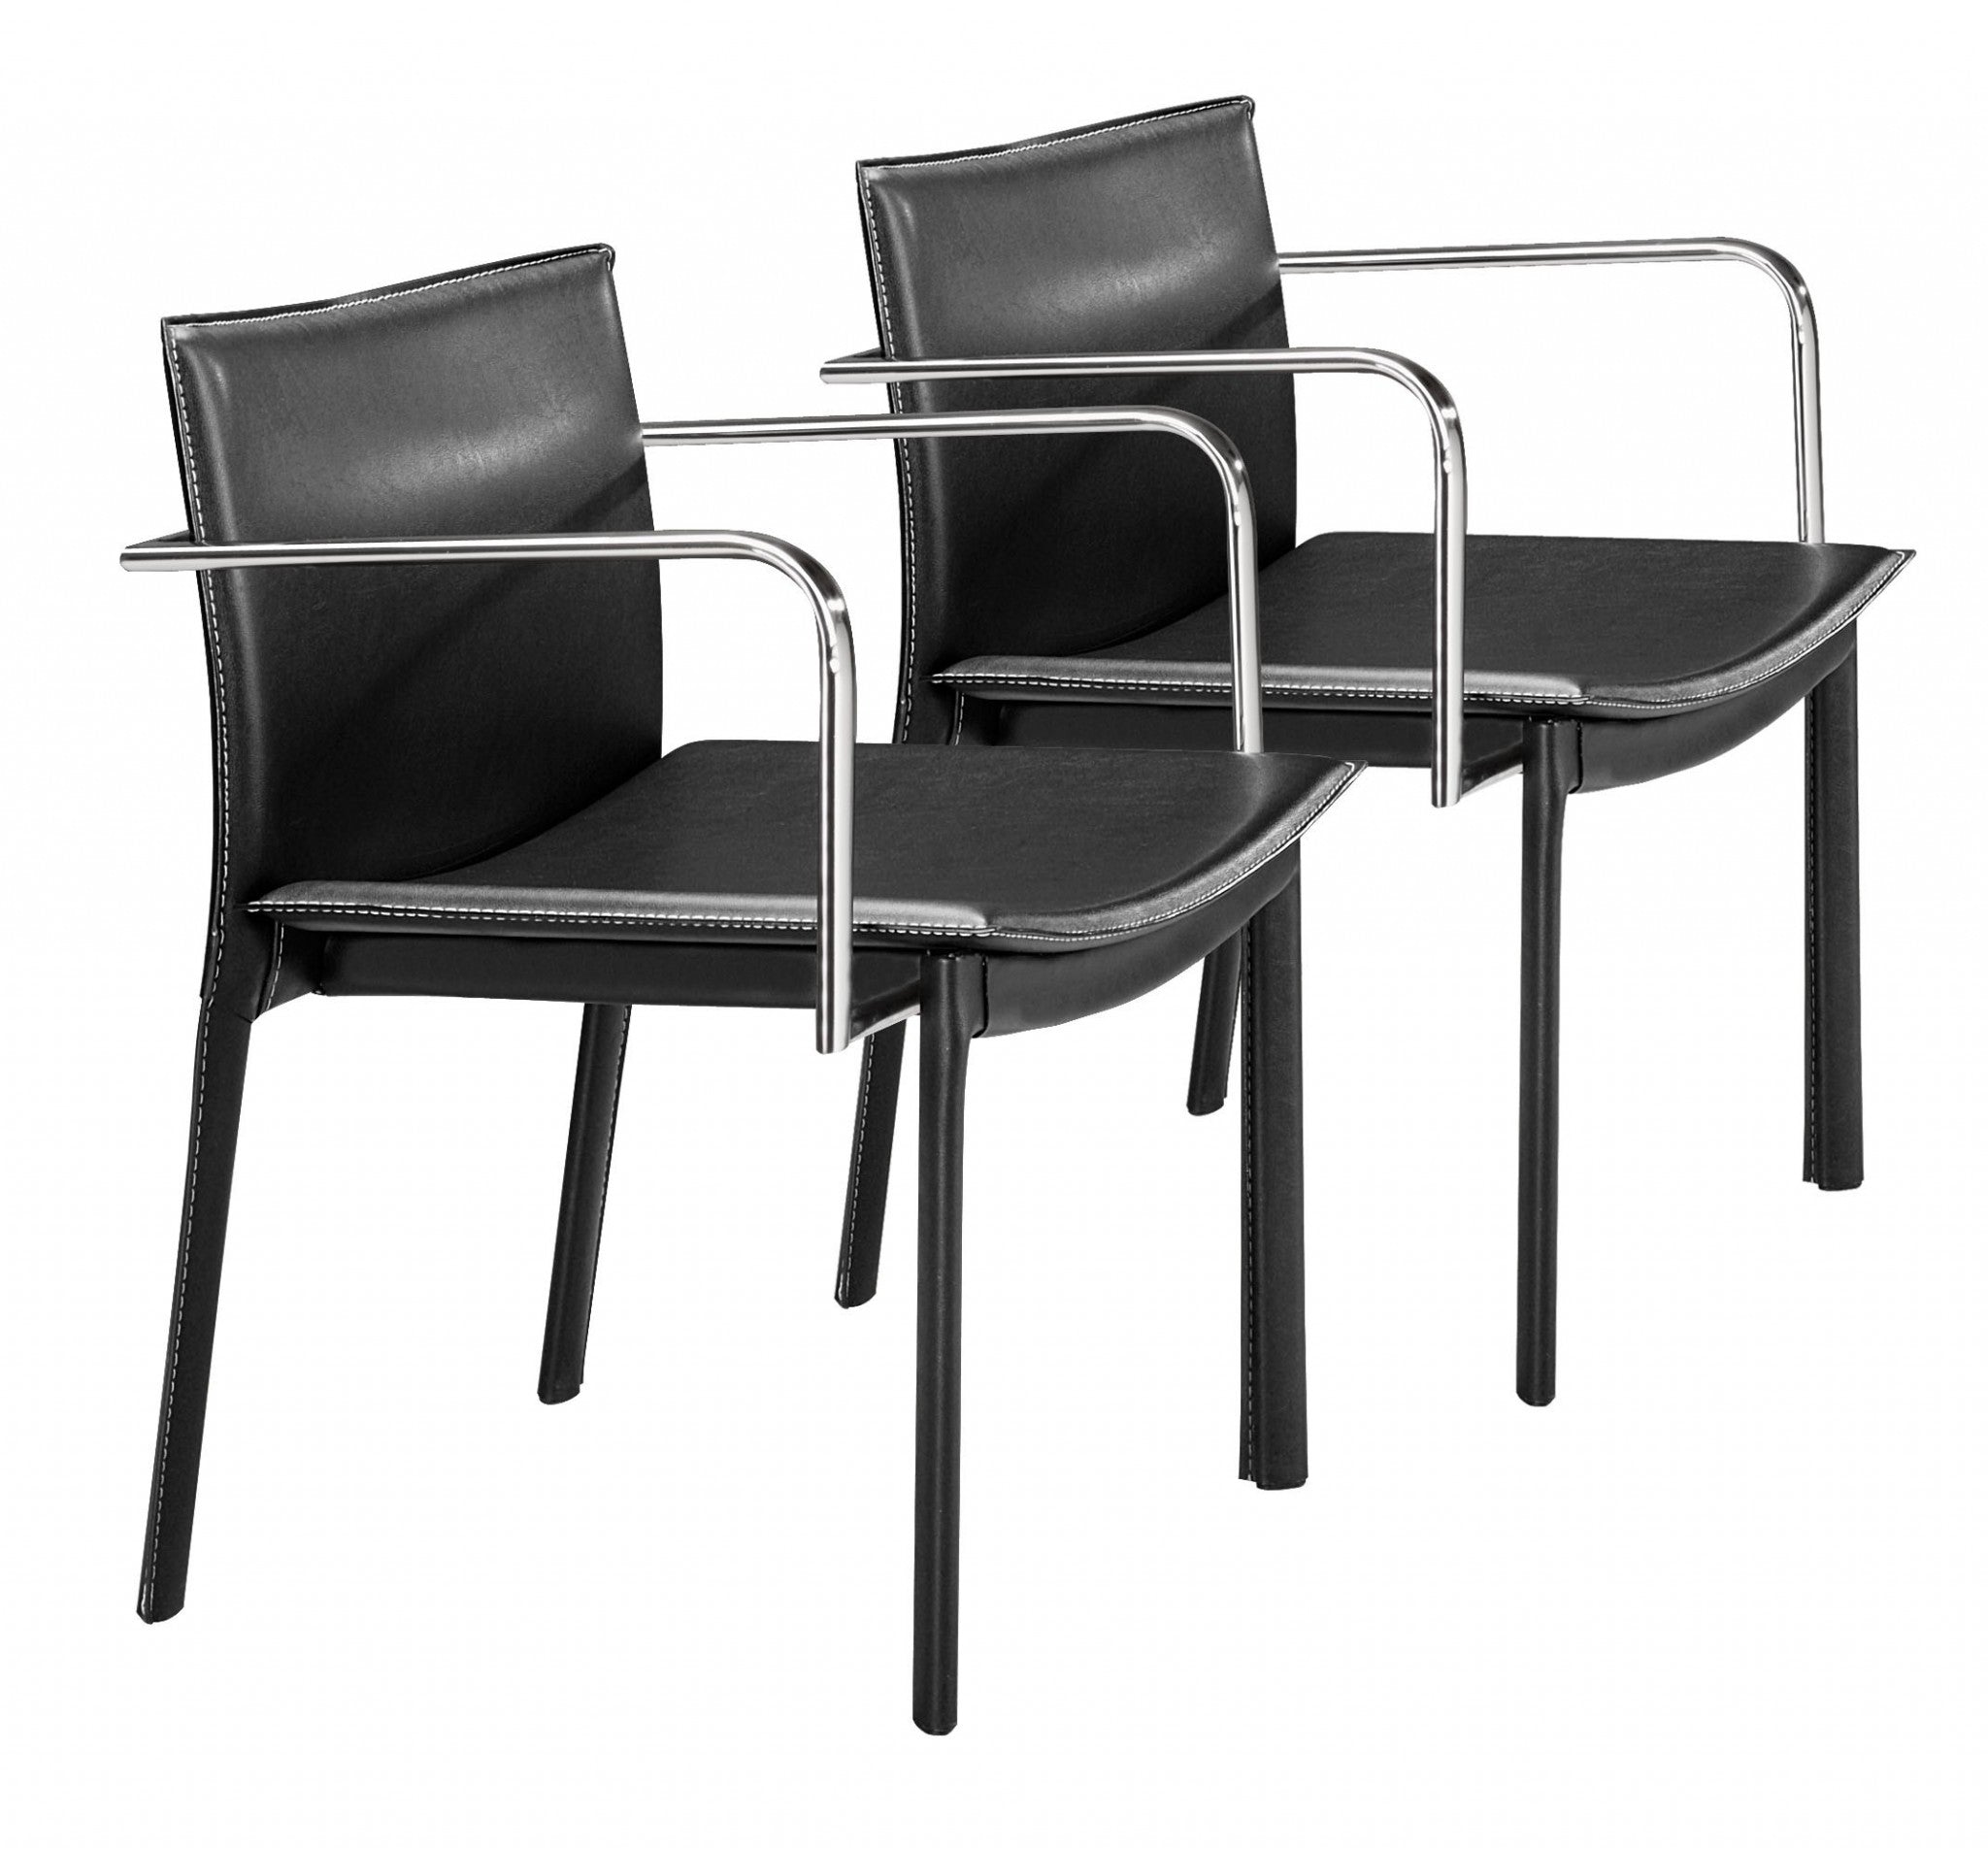 Set-of-Two-Chrome-Black-Faux-Leather-Armchairs-Office-Chairs